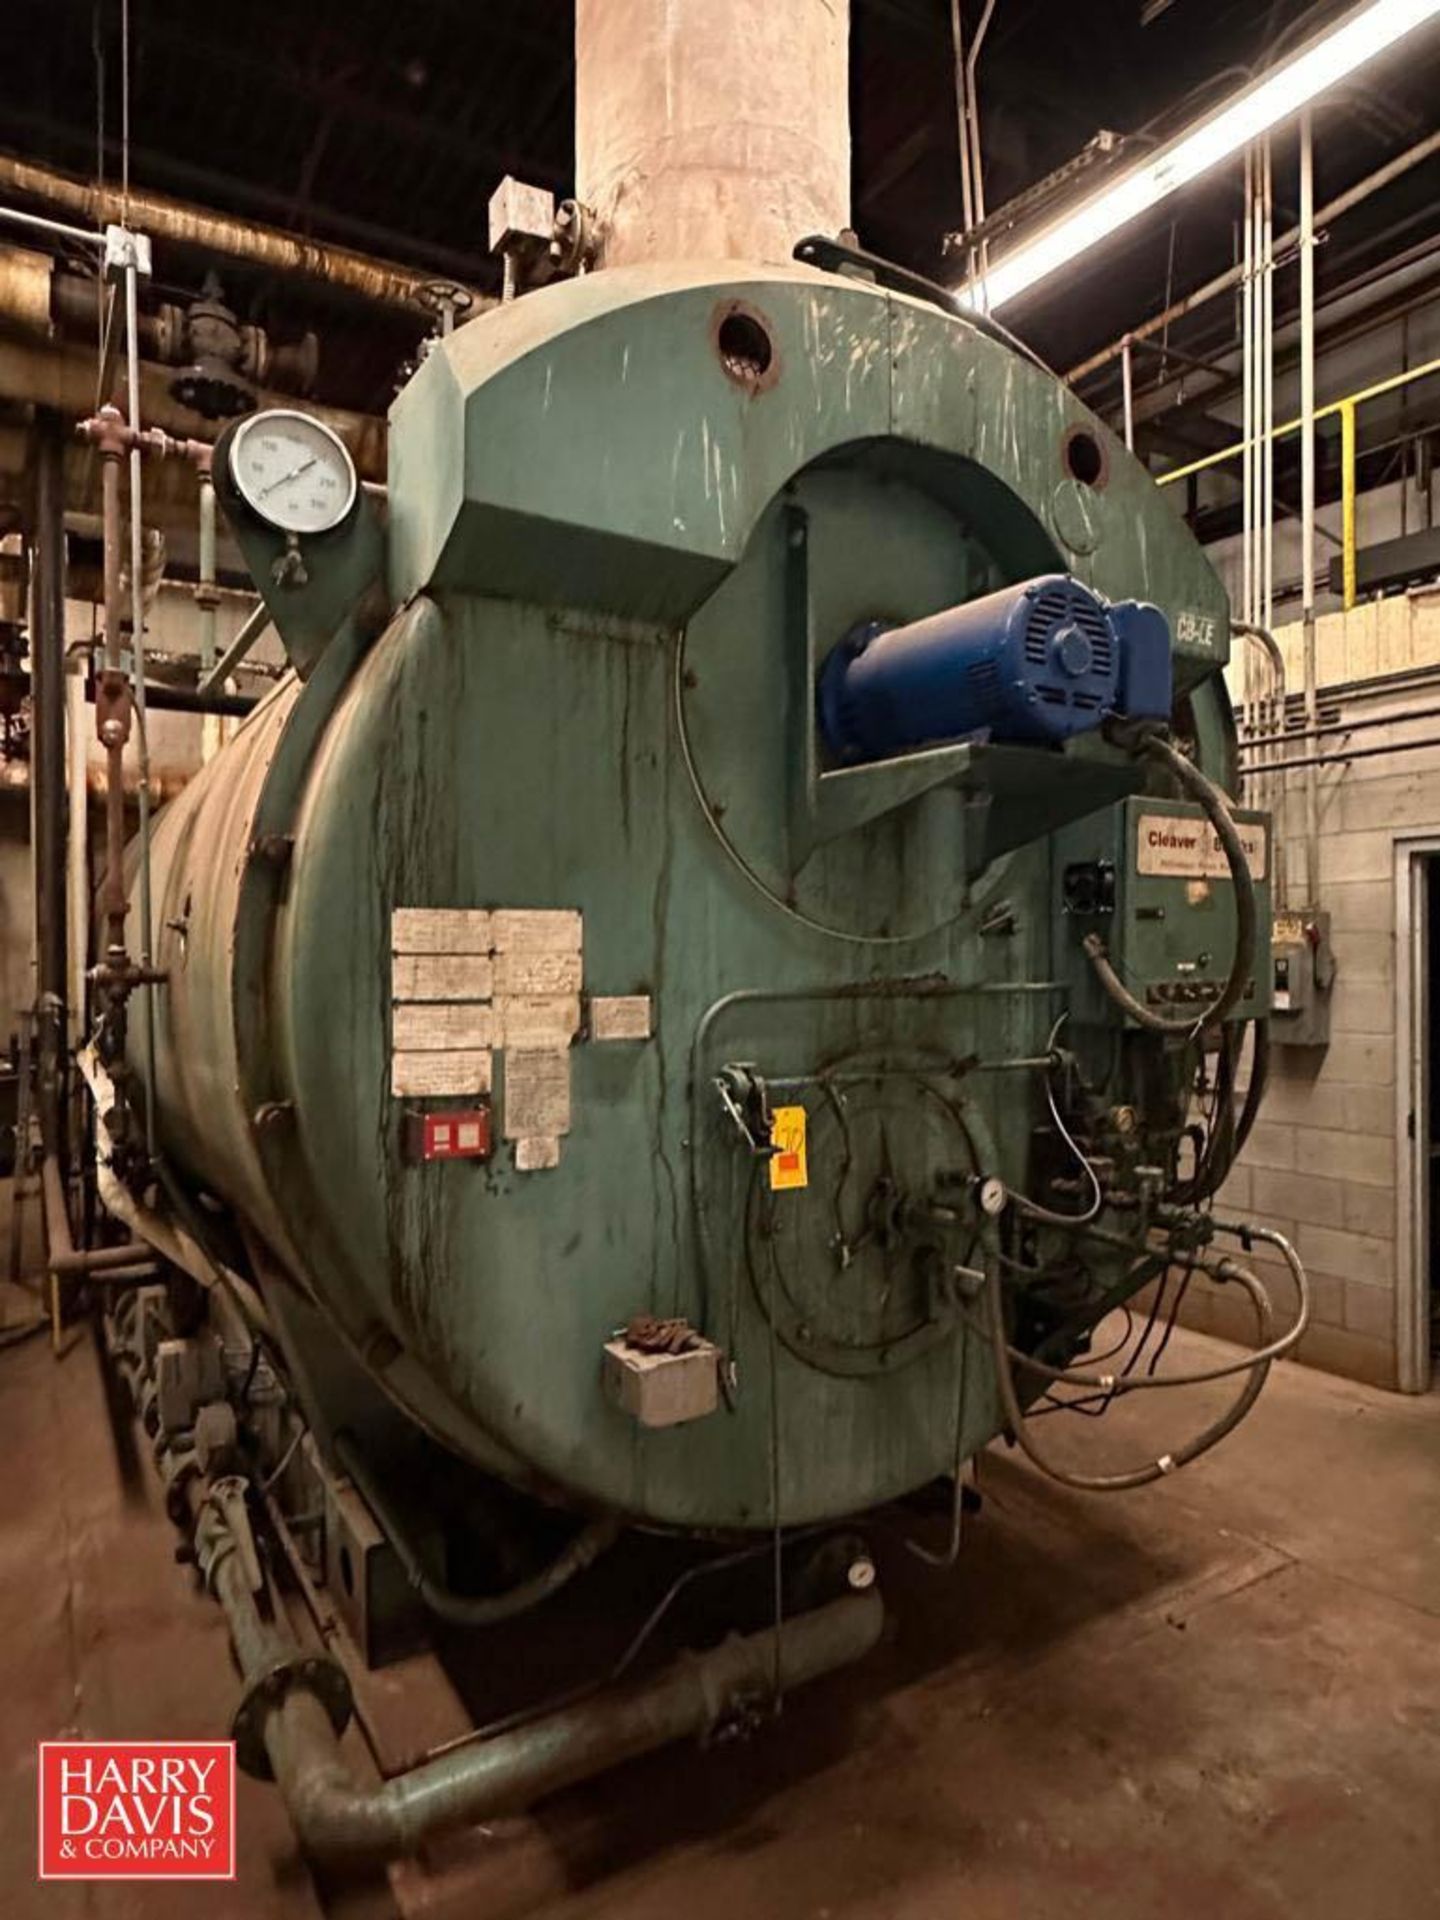 Cleaver Brooks Natural Gas CB Package Boiler, Model: CB1200700200, 200 PSI, 40 HP Blower Motor and 7